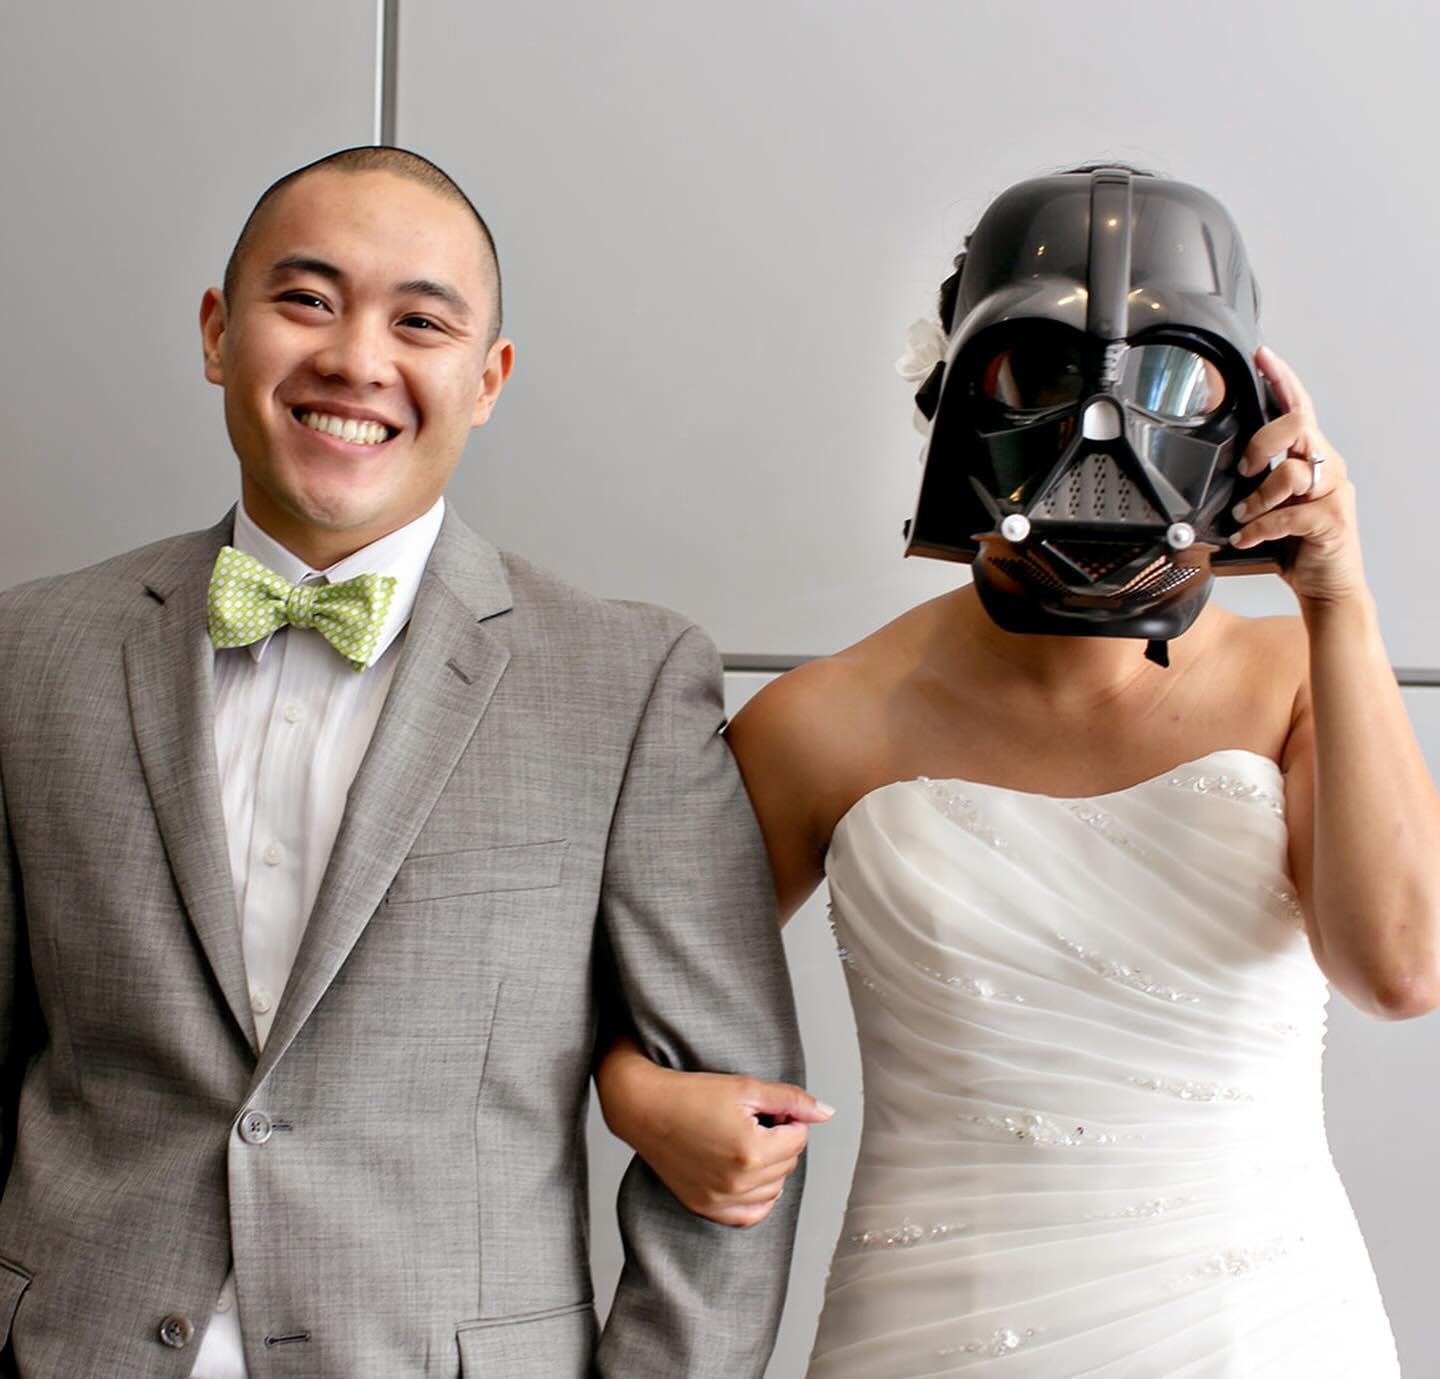 It&rsquo;s that time of year again. May the Fourth be with you! #funweddings #starwarswedding #seattleweddingphotographer #woodinvilleweddingphotographer #columbiawinerywedding #weddingsinwoodinville